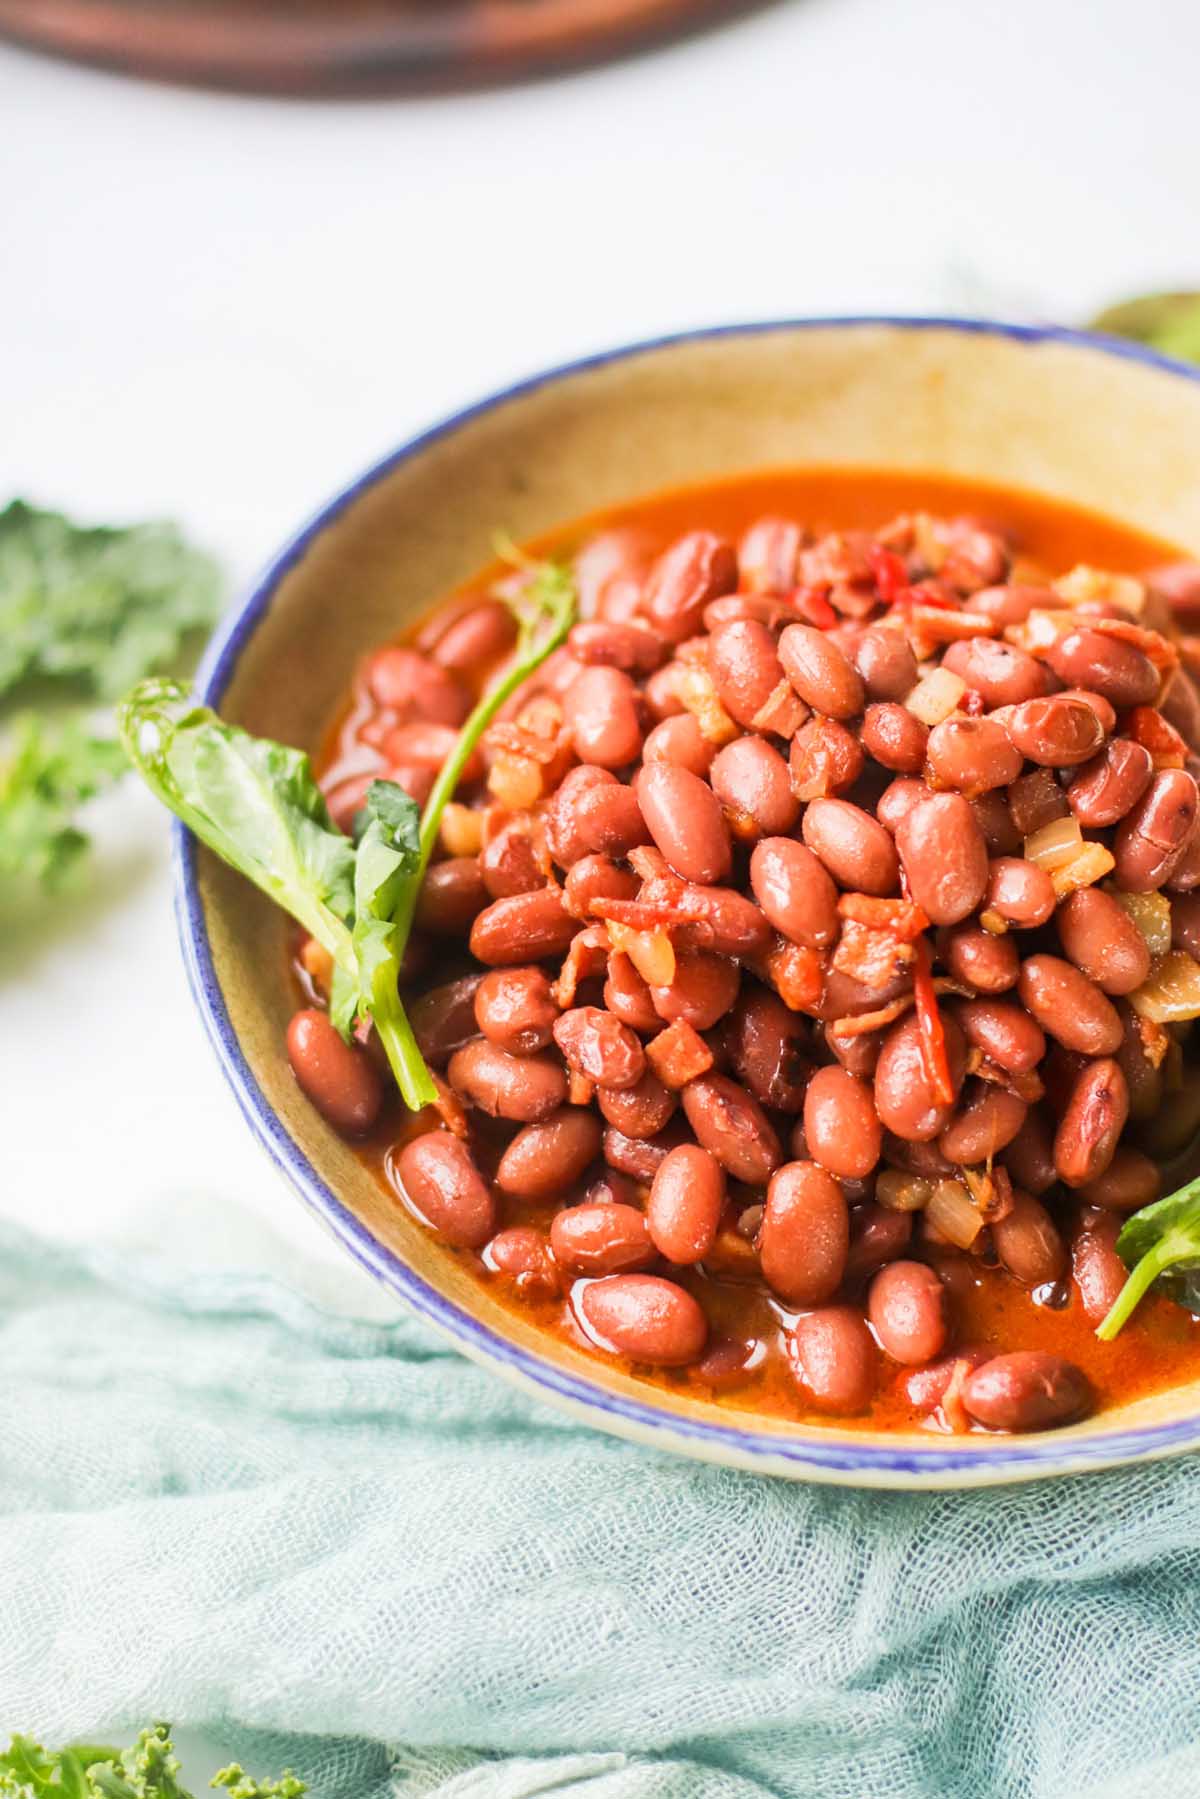 Beans in a bowl with liquid.